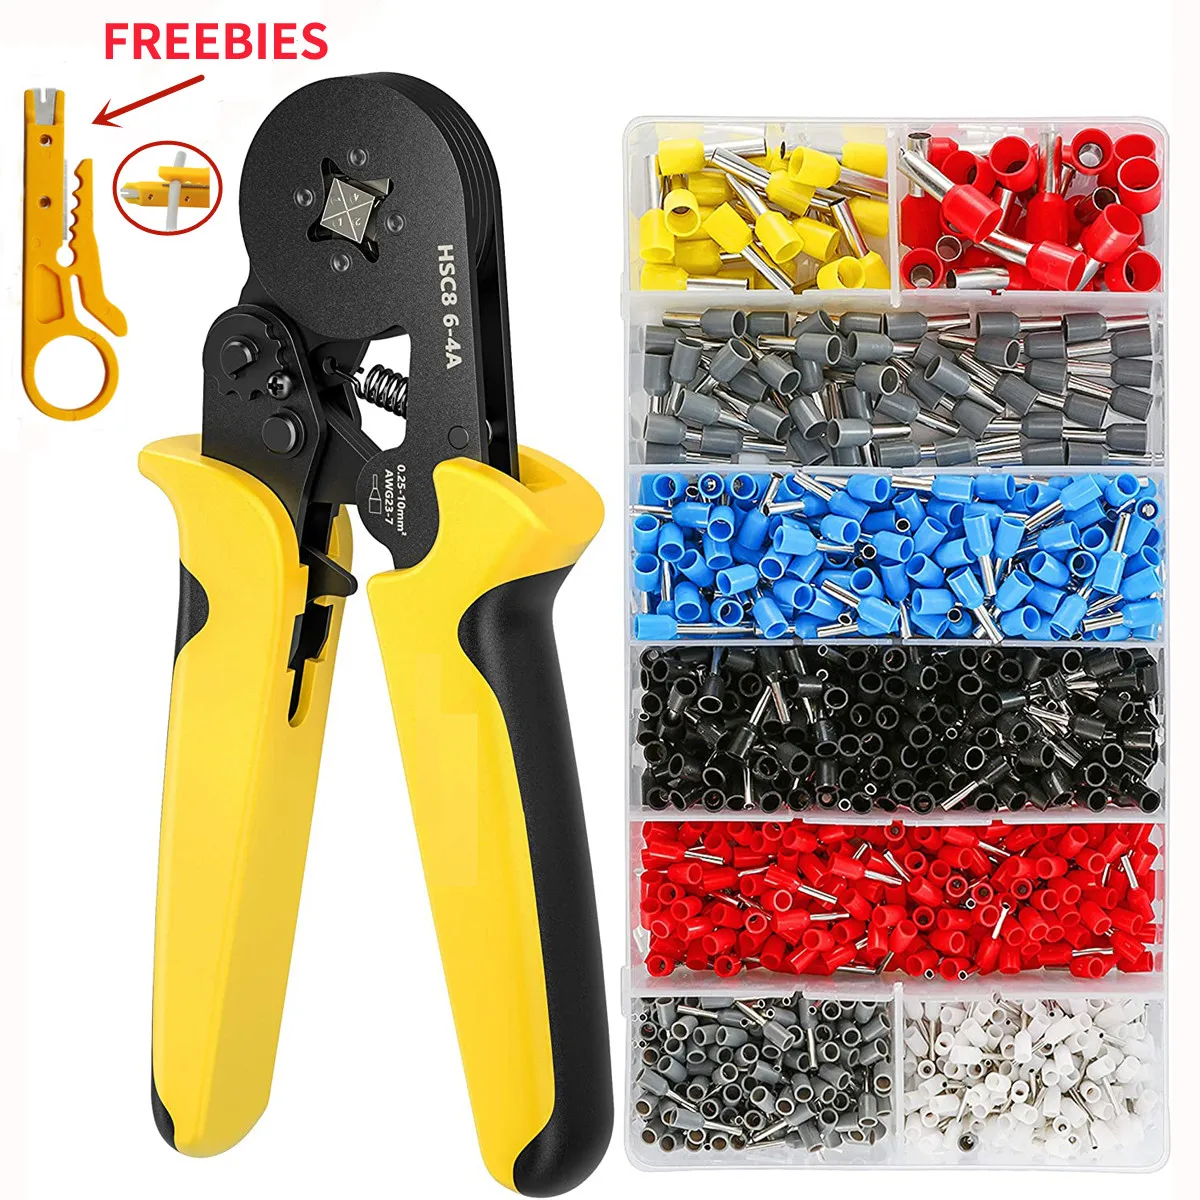 1PCS Adjusting Terminal Crimping Pliers Tools FOR 6-16m㎡ WIRE END FERRULES 